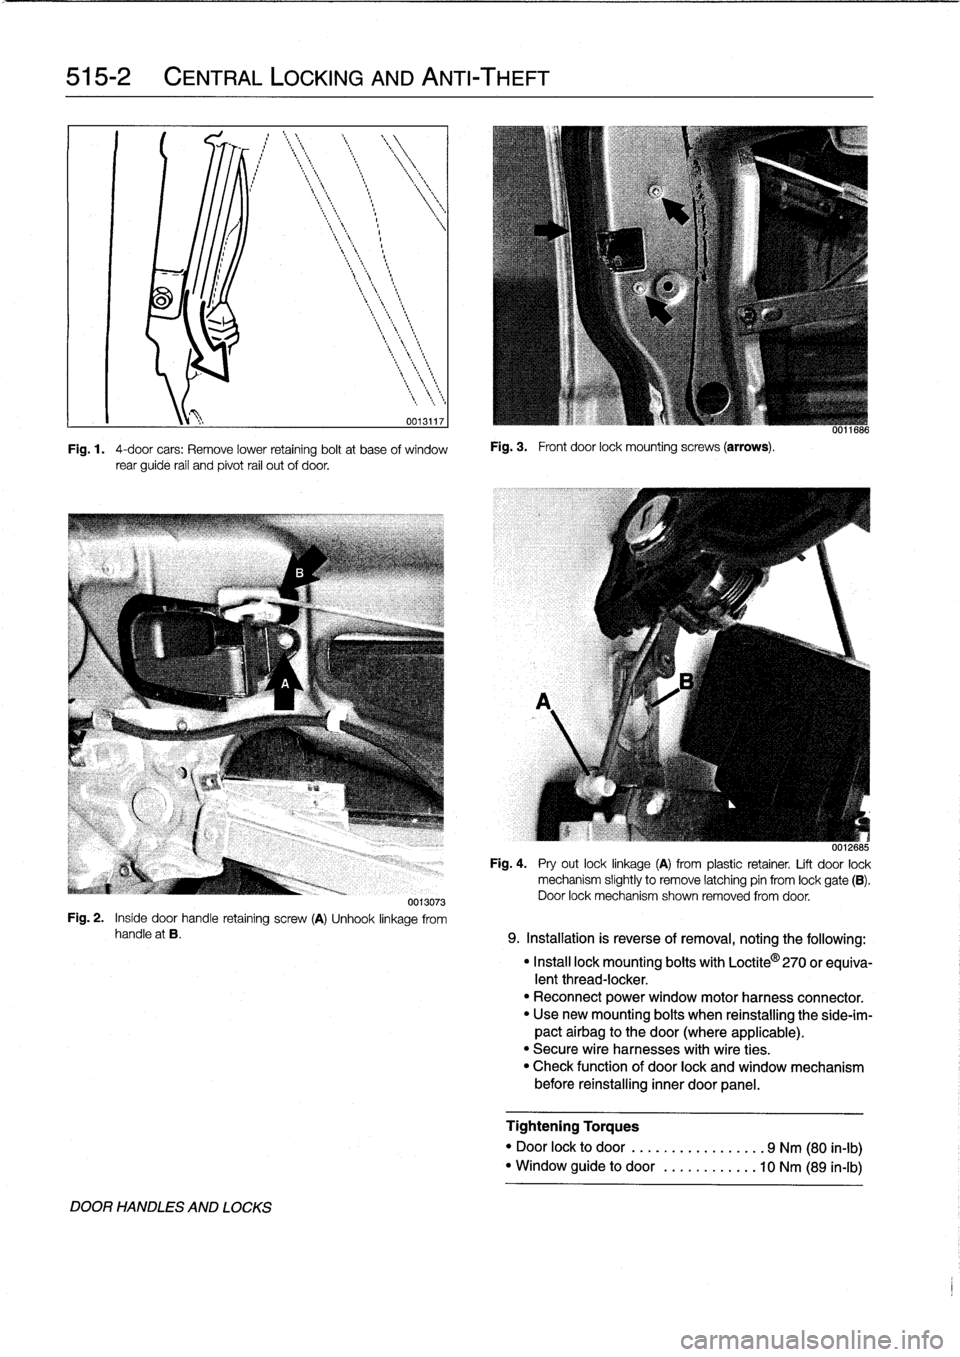 BMW 318i 1997 E36 Owners Manual 
515-2

	

CENTRAL
LOCKING
AND
ANTI-THEFT

0013117

Fig
.
1
.

	

4-door
cars
:
Remove
lower
retaining
boltat
base
of
window
rear
guide
rail
and
pivot
rail
out
of
door
.

Fig
.
3
.

	

Front
door
lock